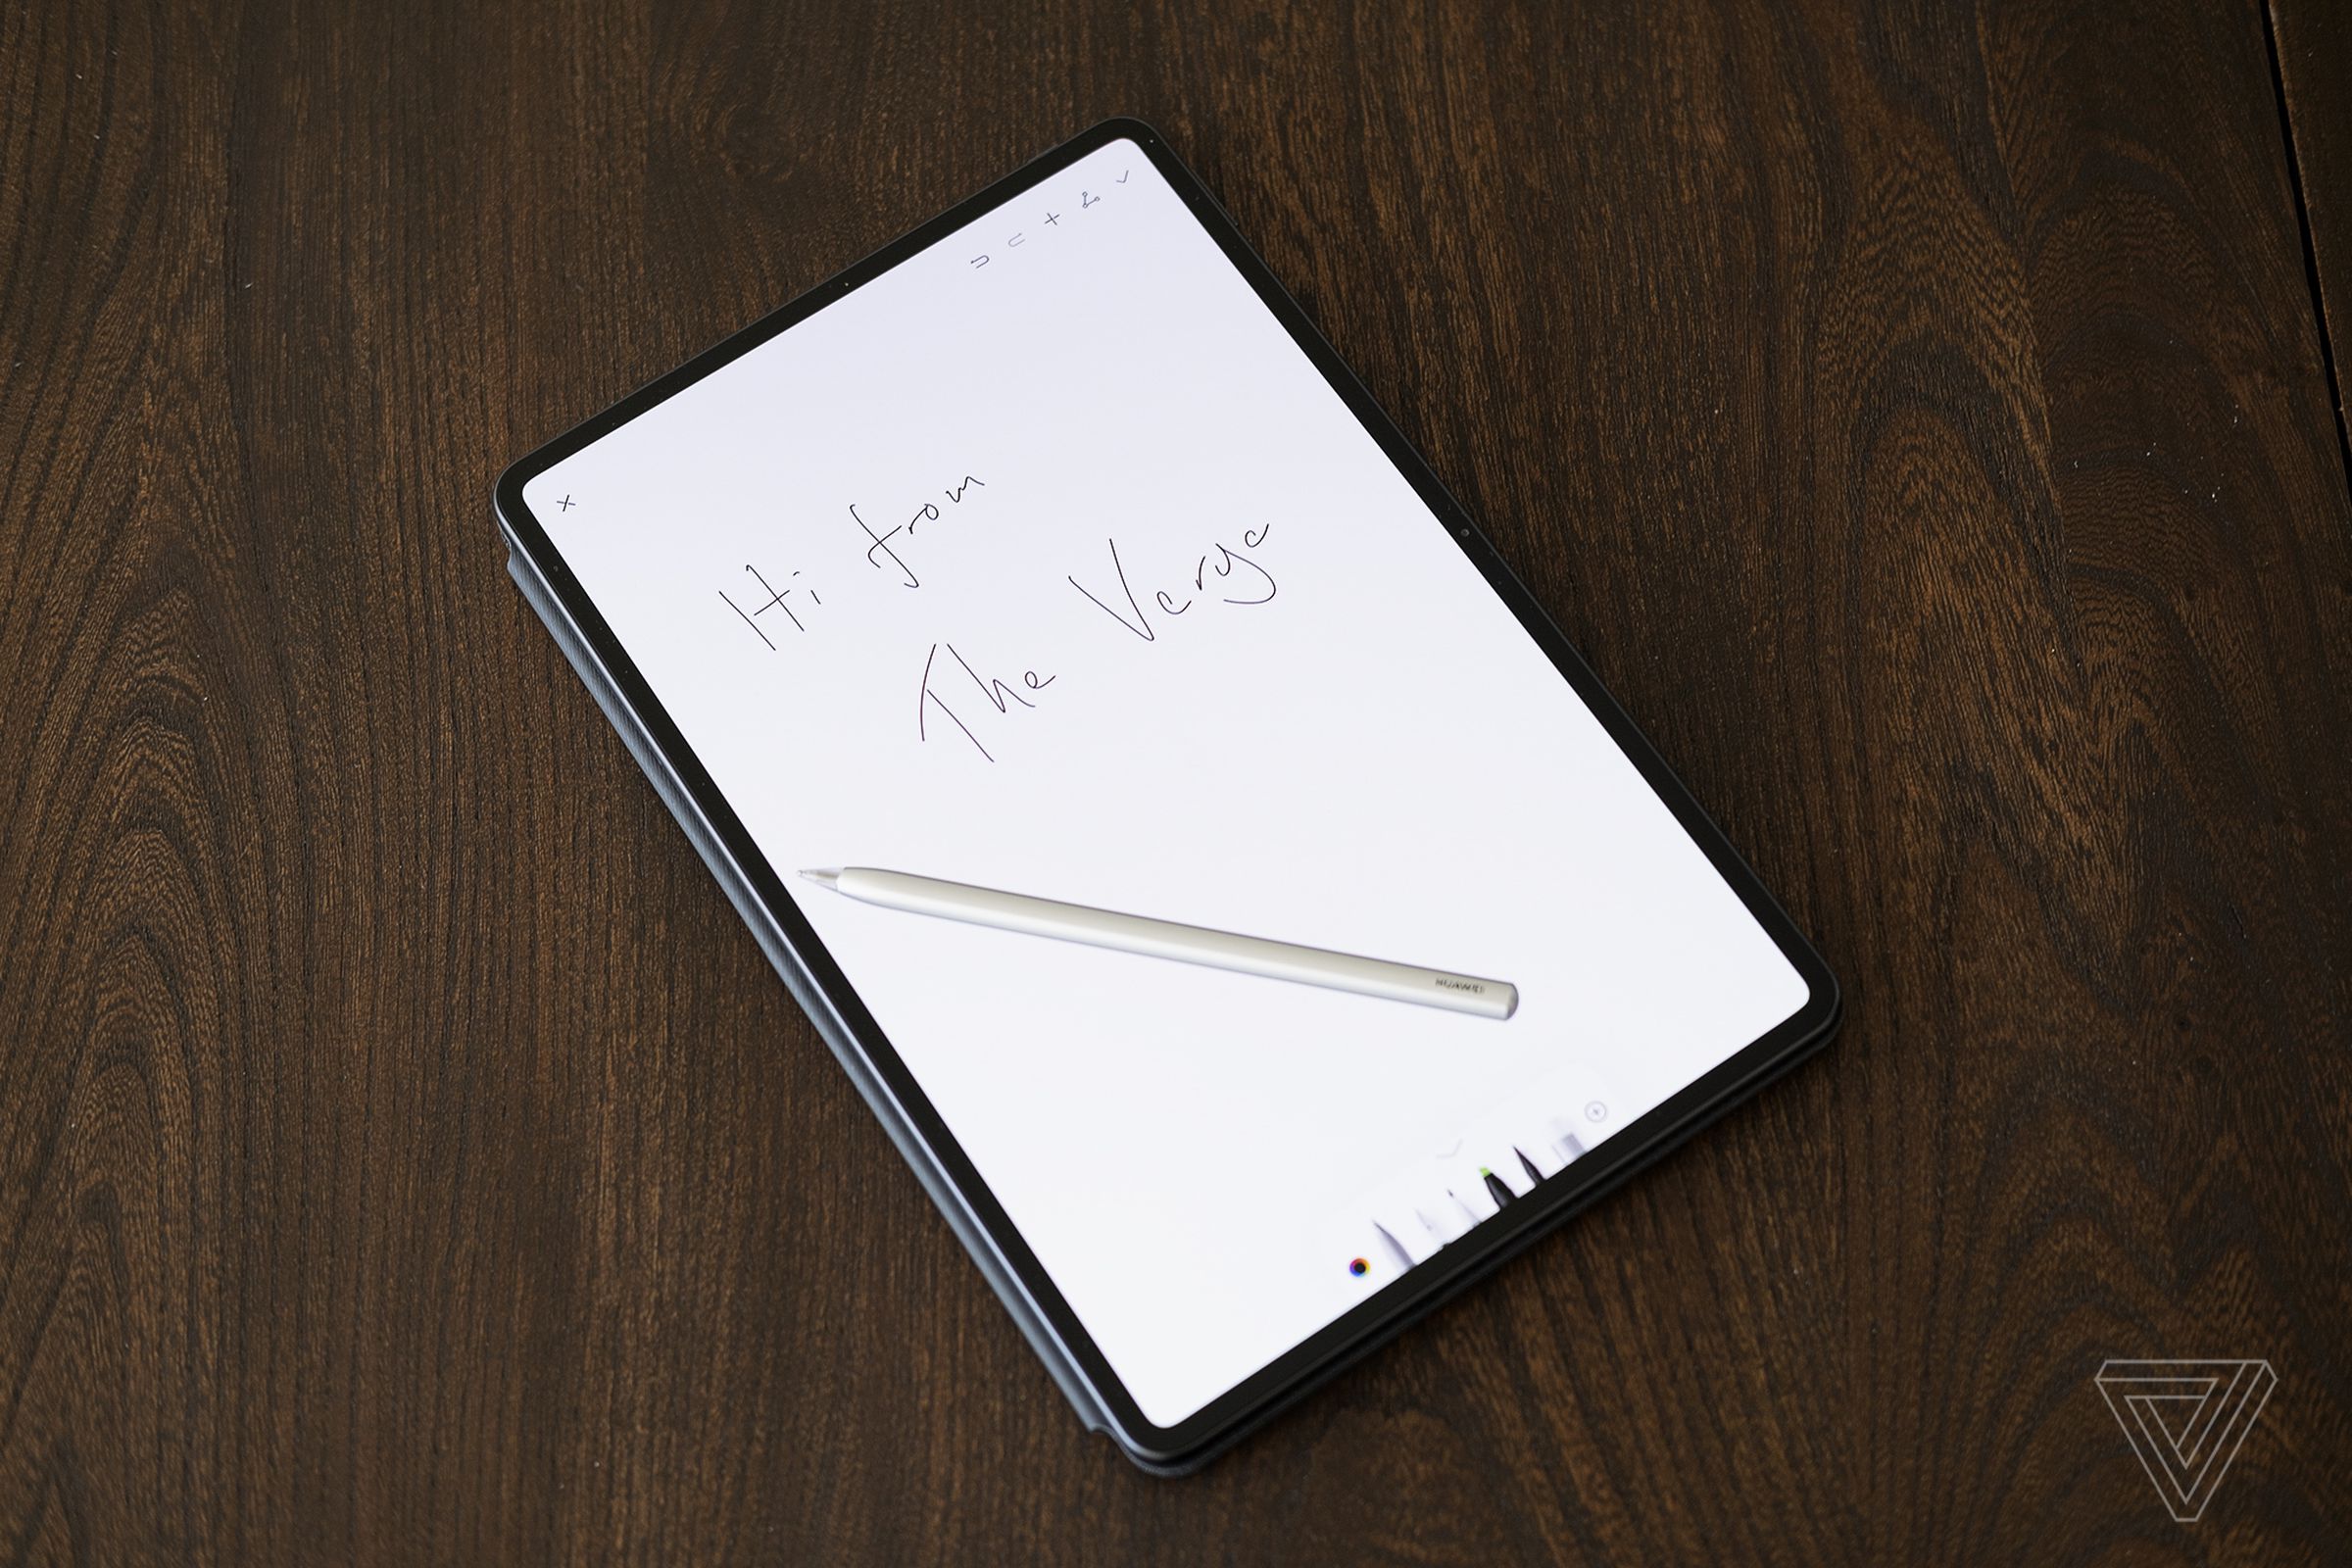 Also announced today is a new M-Pencil stylus.